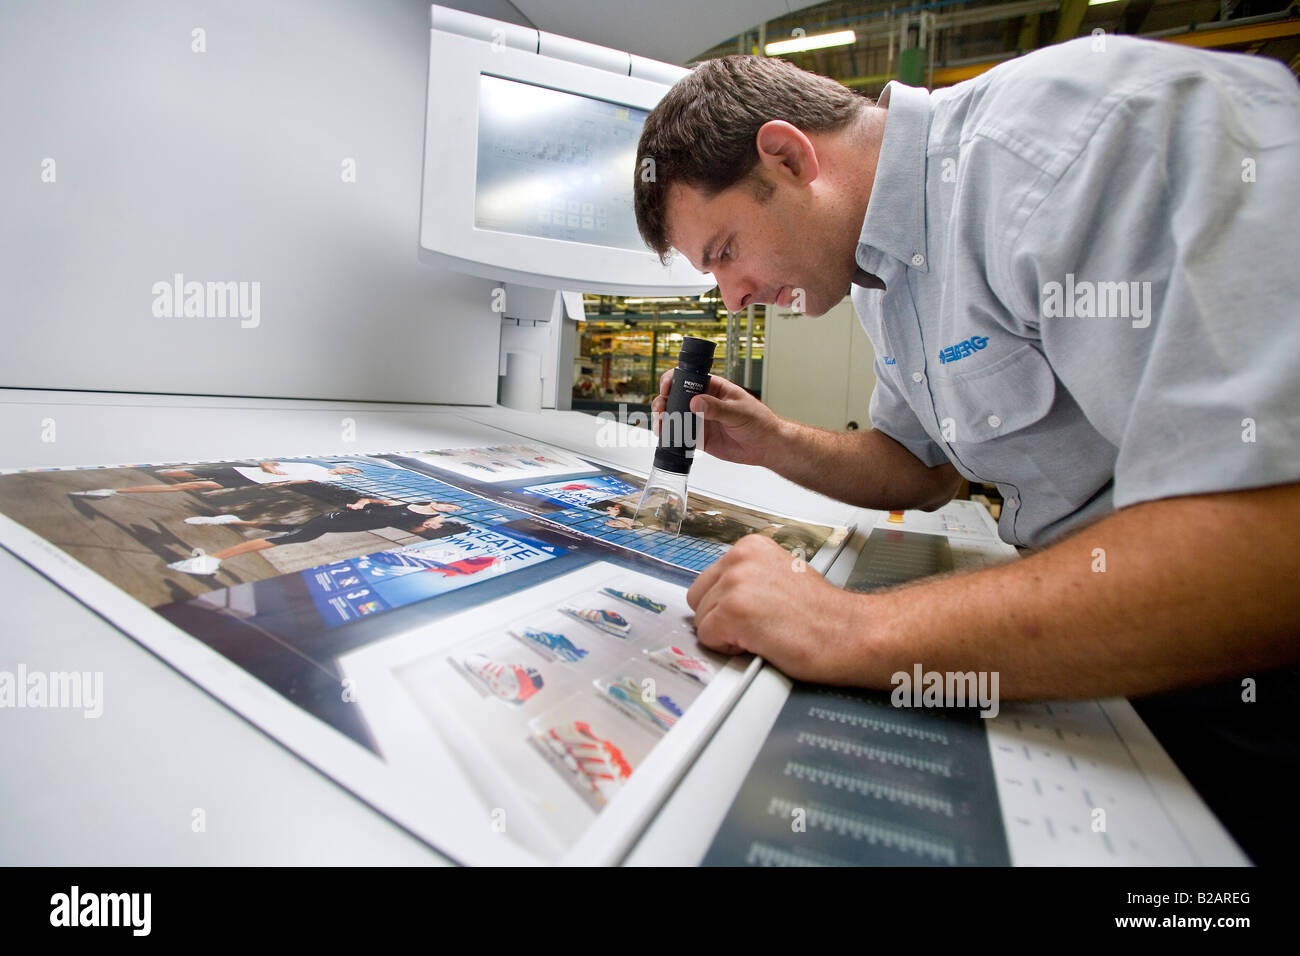 Reportage of the Heidelberger Druckmaschinen AG production of printing machines worker during final control of a test print Stock Photo